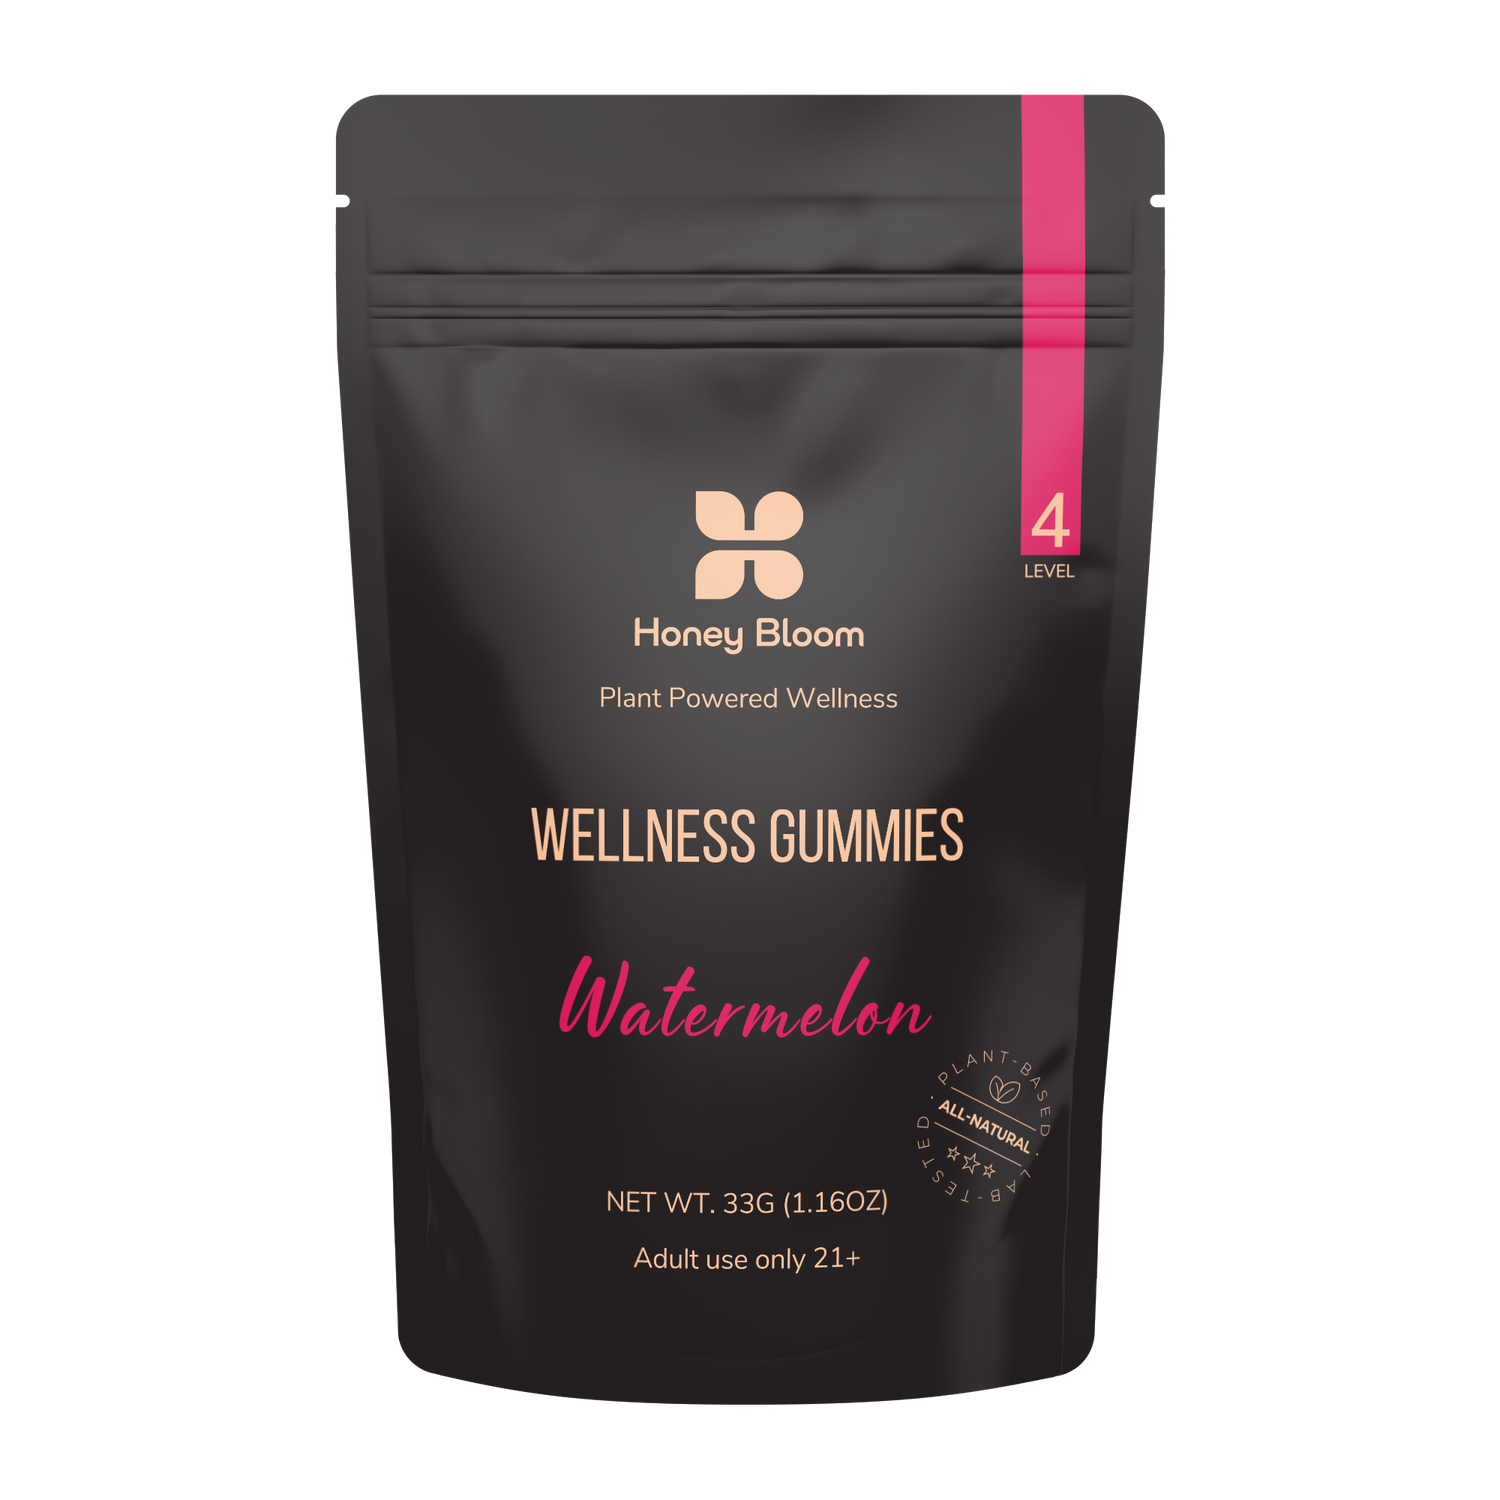 Front Packaging for 'Wellness Gummies' with Full-Spectrum, Watermelon Level 4